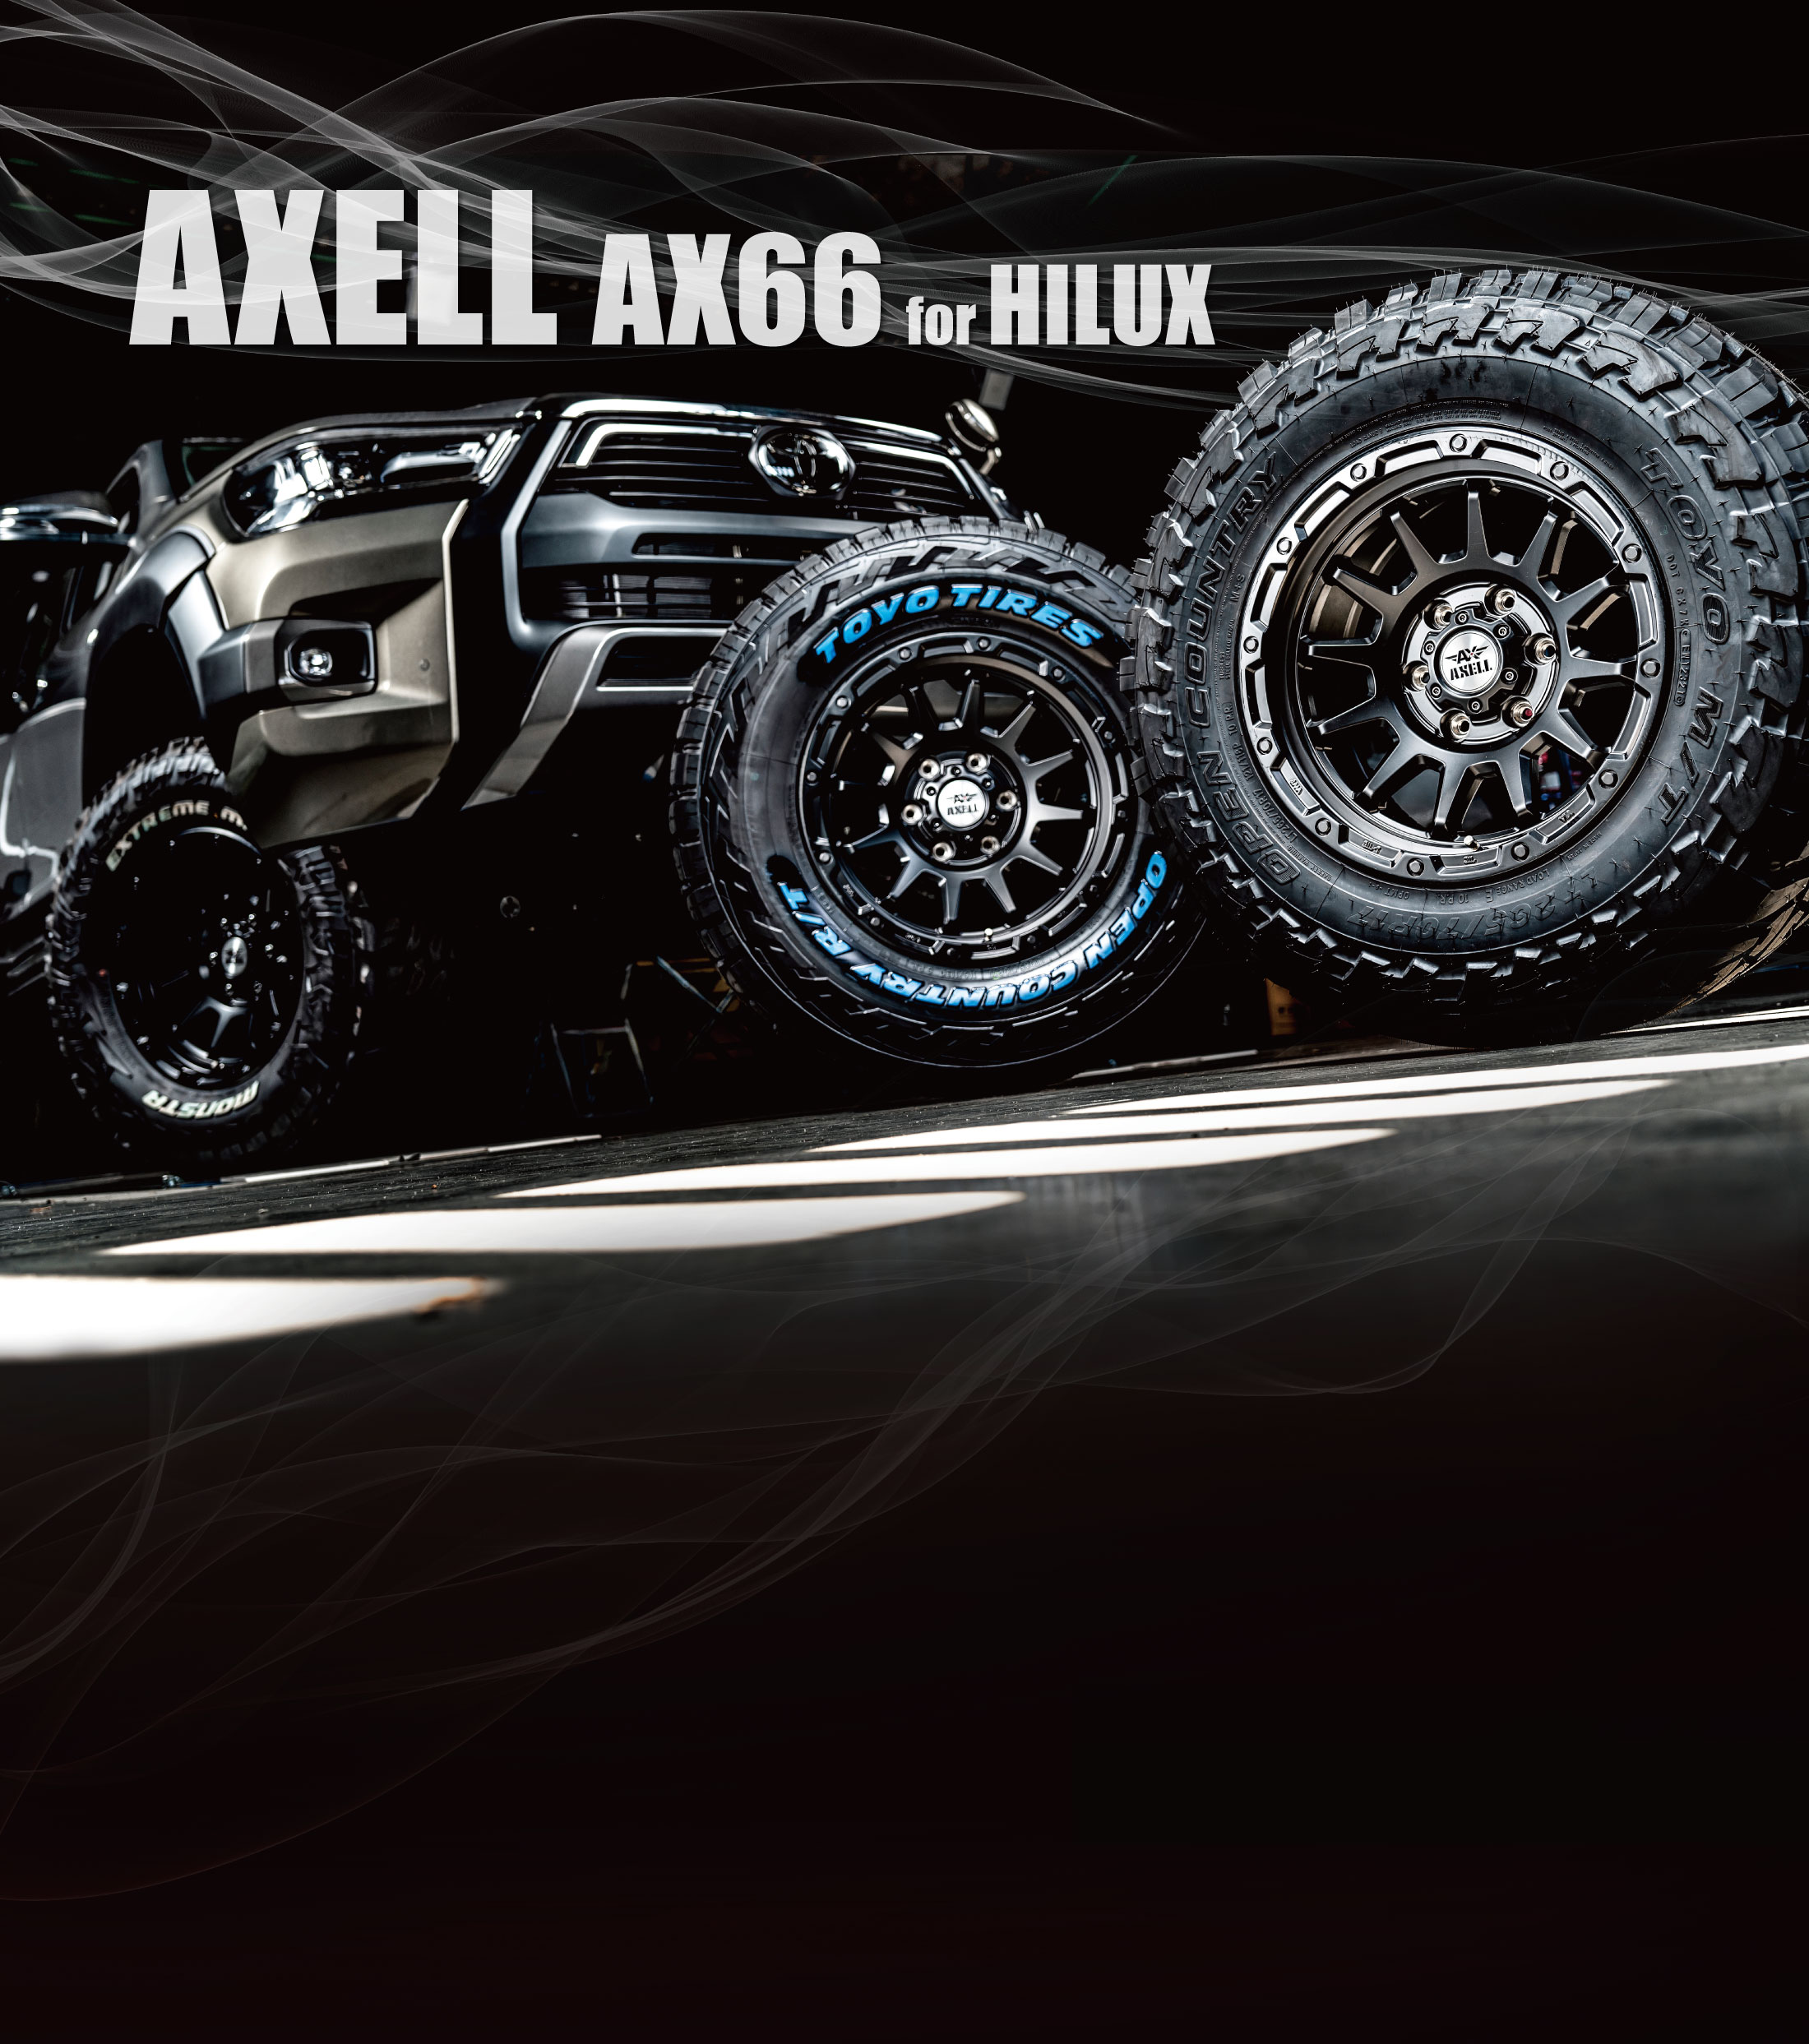 AXELL AX66 for HILUX